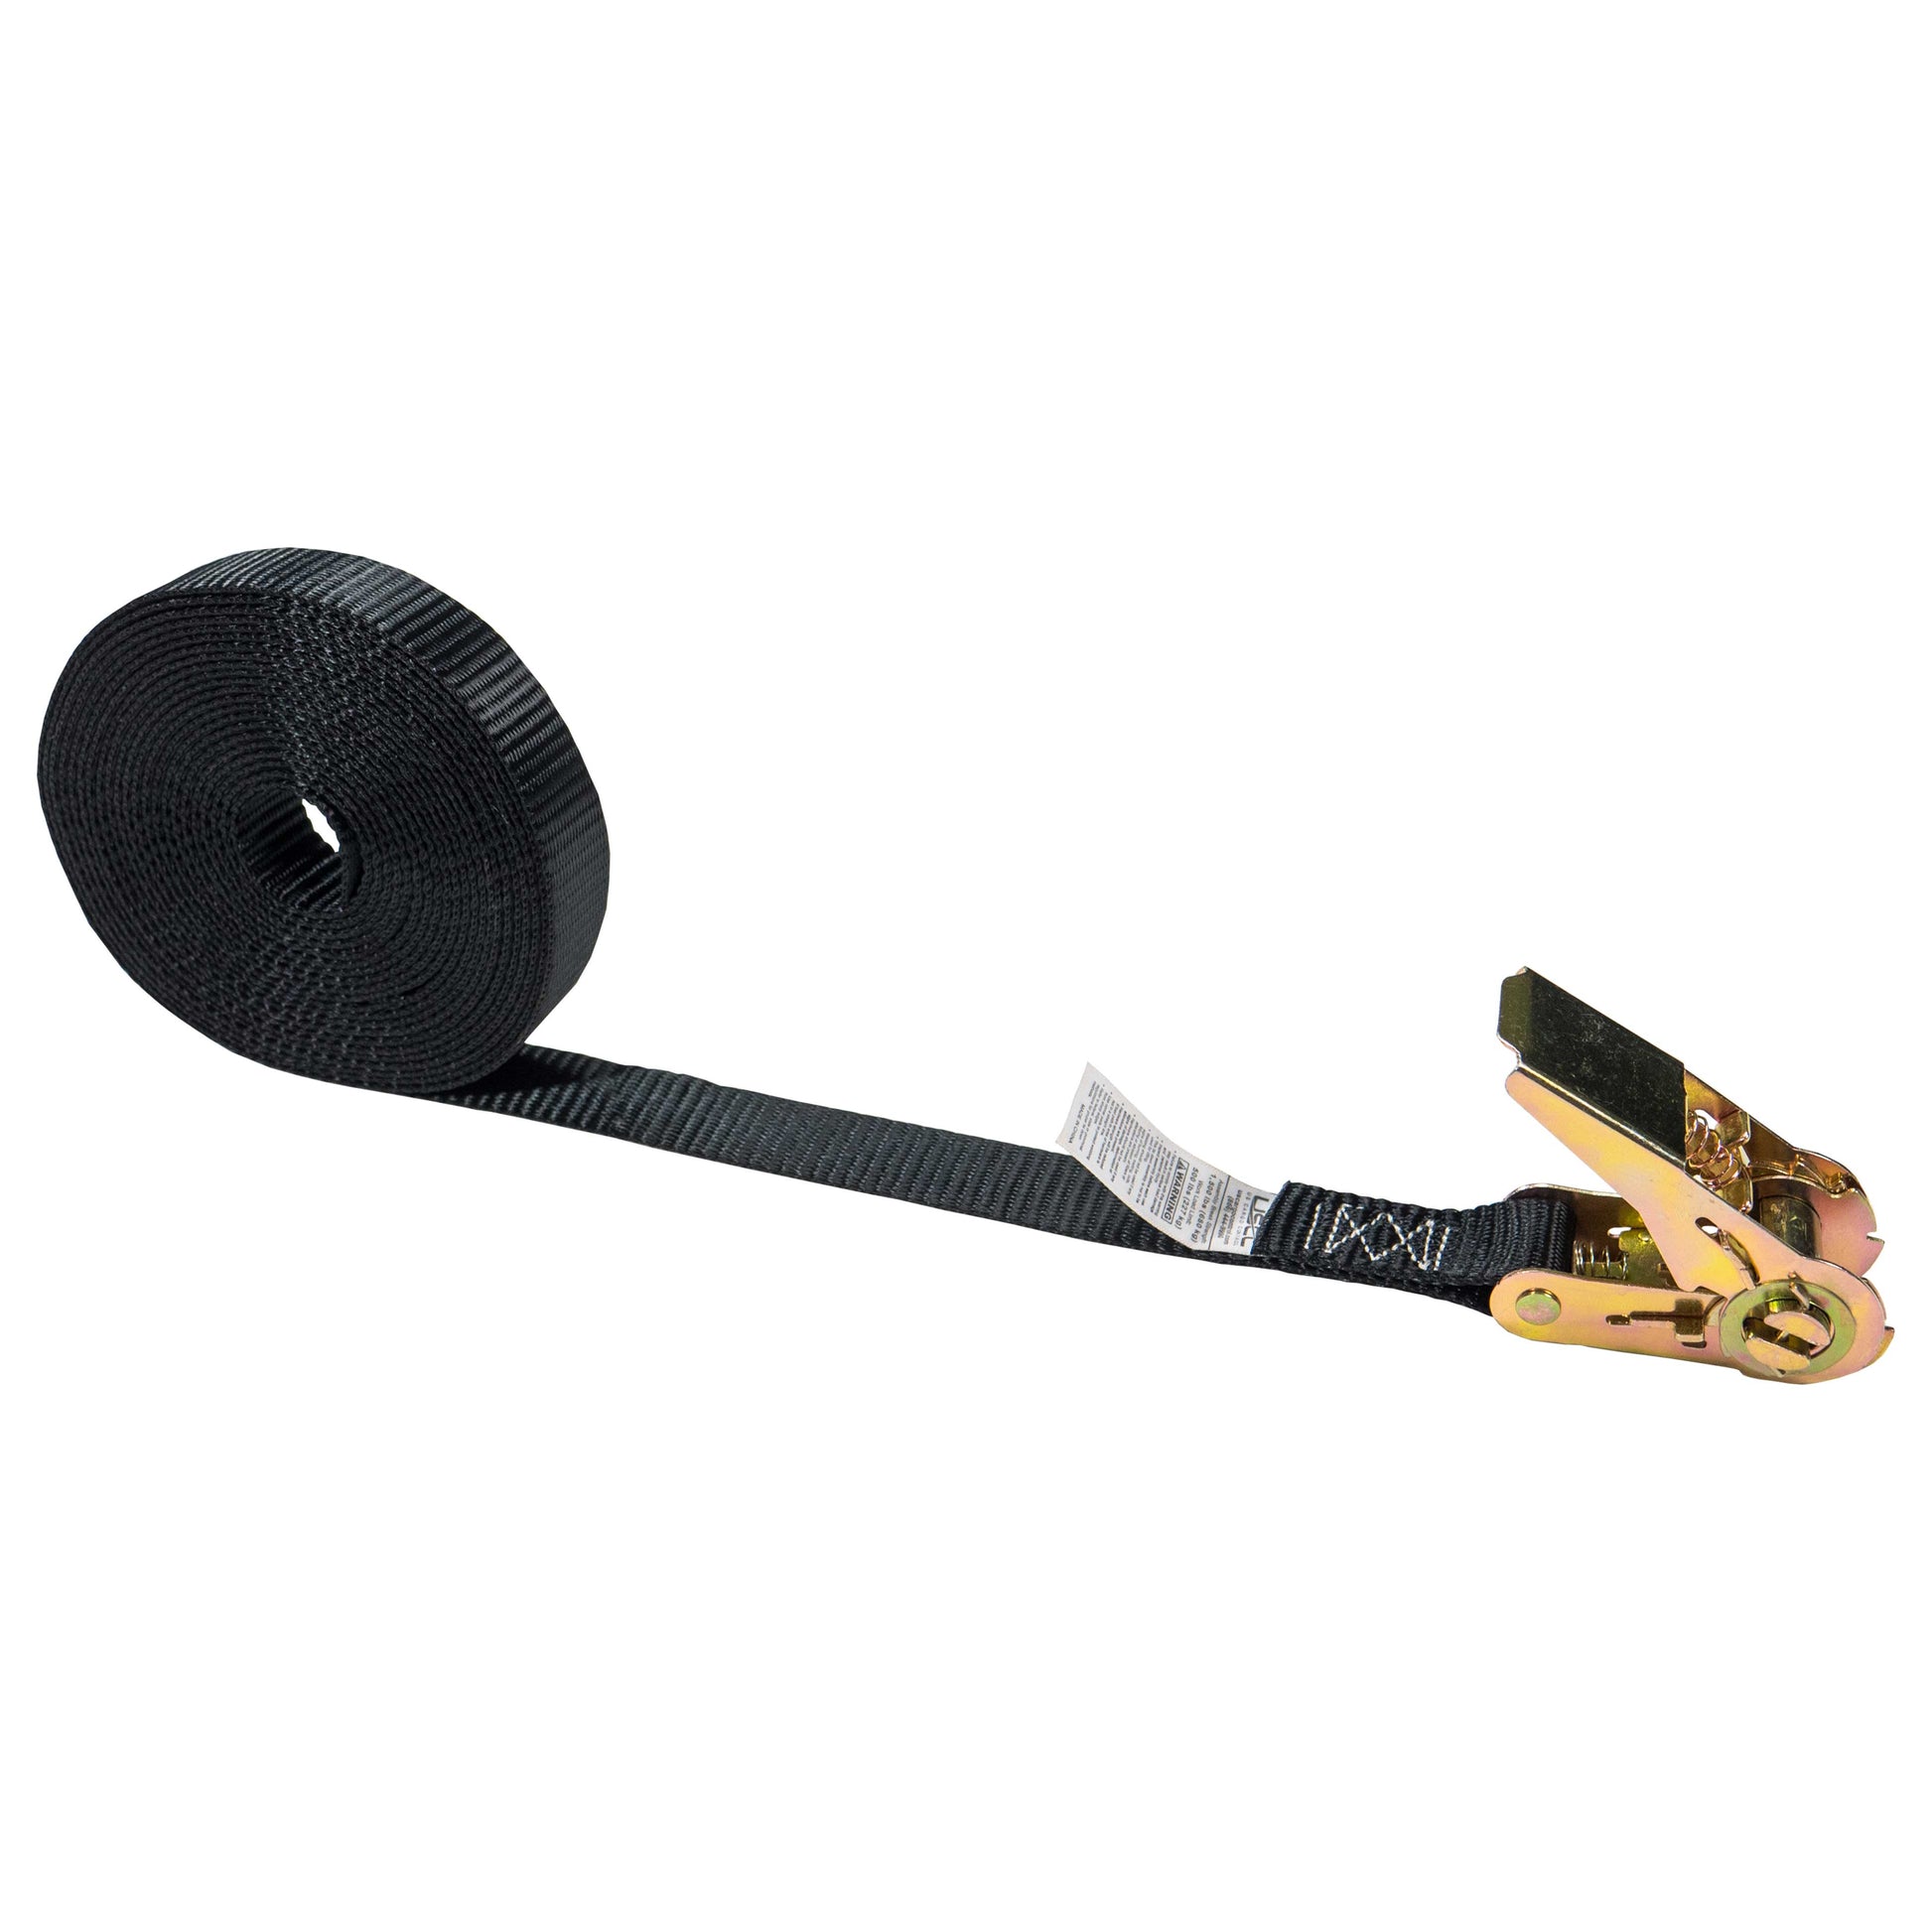 1 inch x 20 foot Black Endless Ratchet Strap image 1 of 9